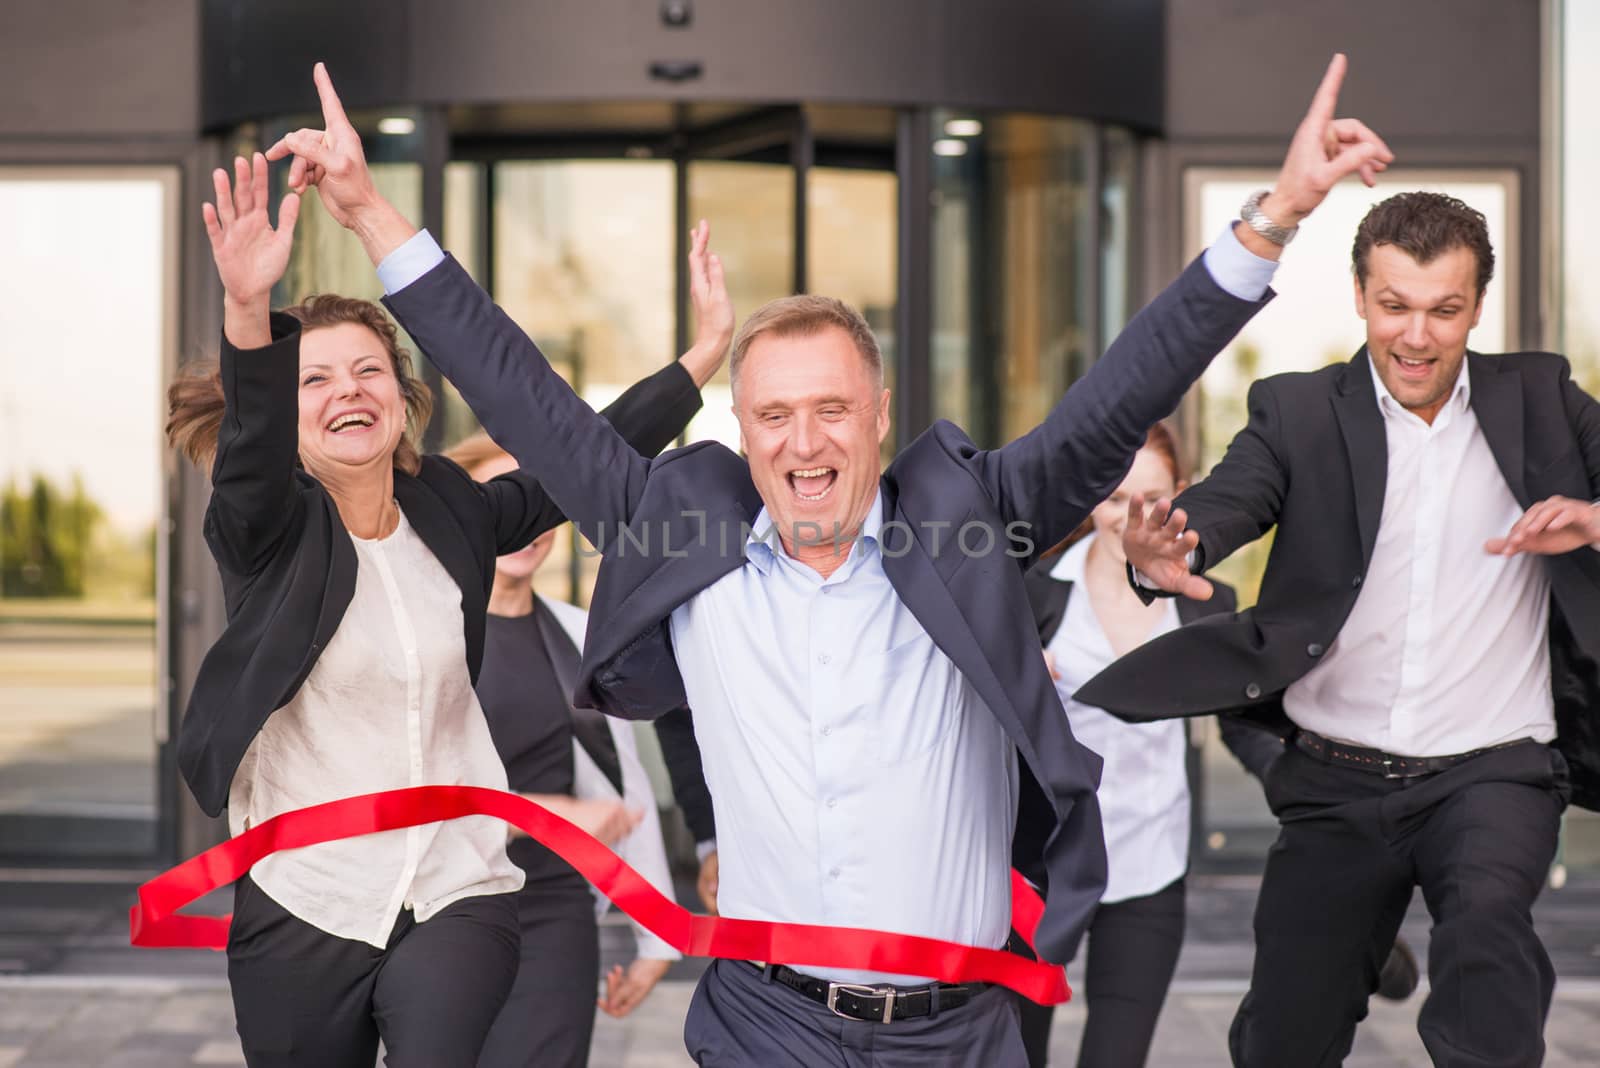 Group of happy business people running from office building crossing red ribbon finish line